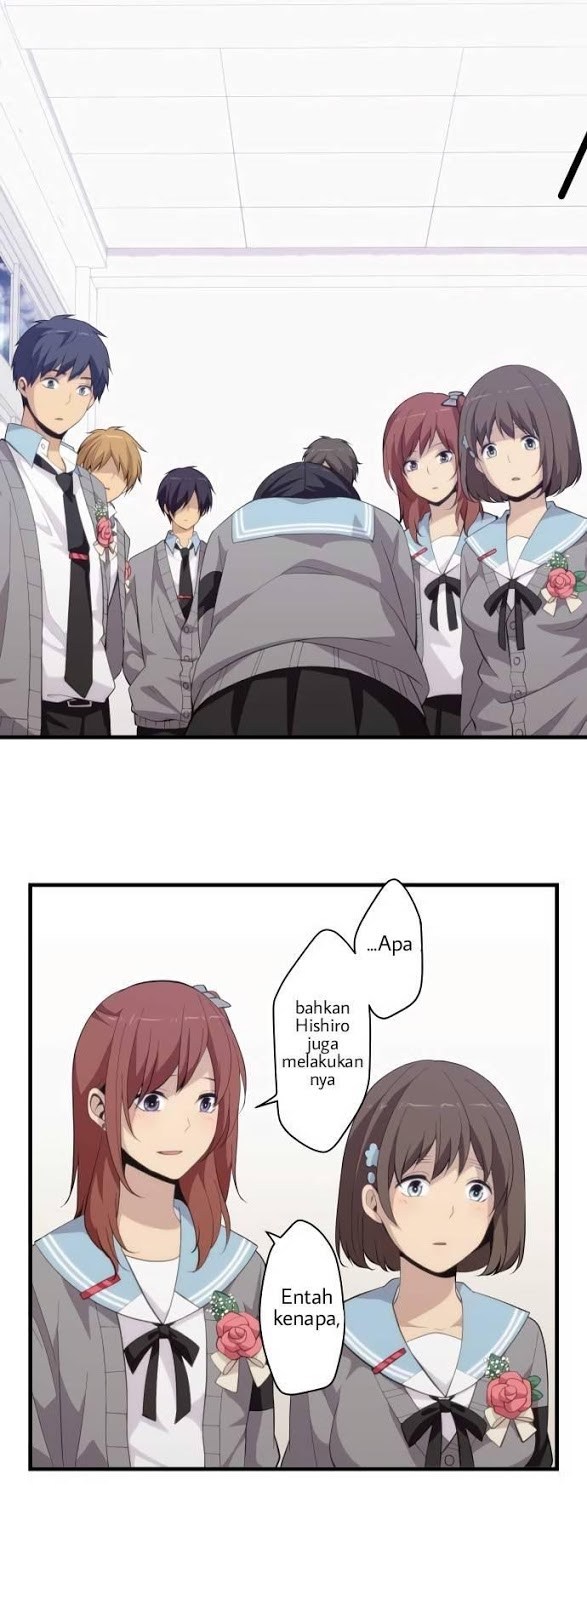 ReLIFE Chapter 212